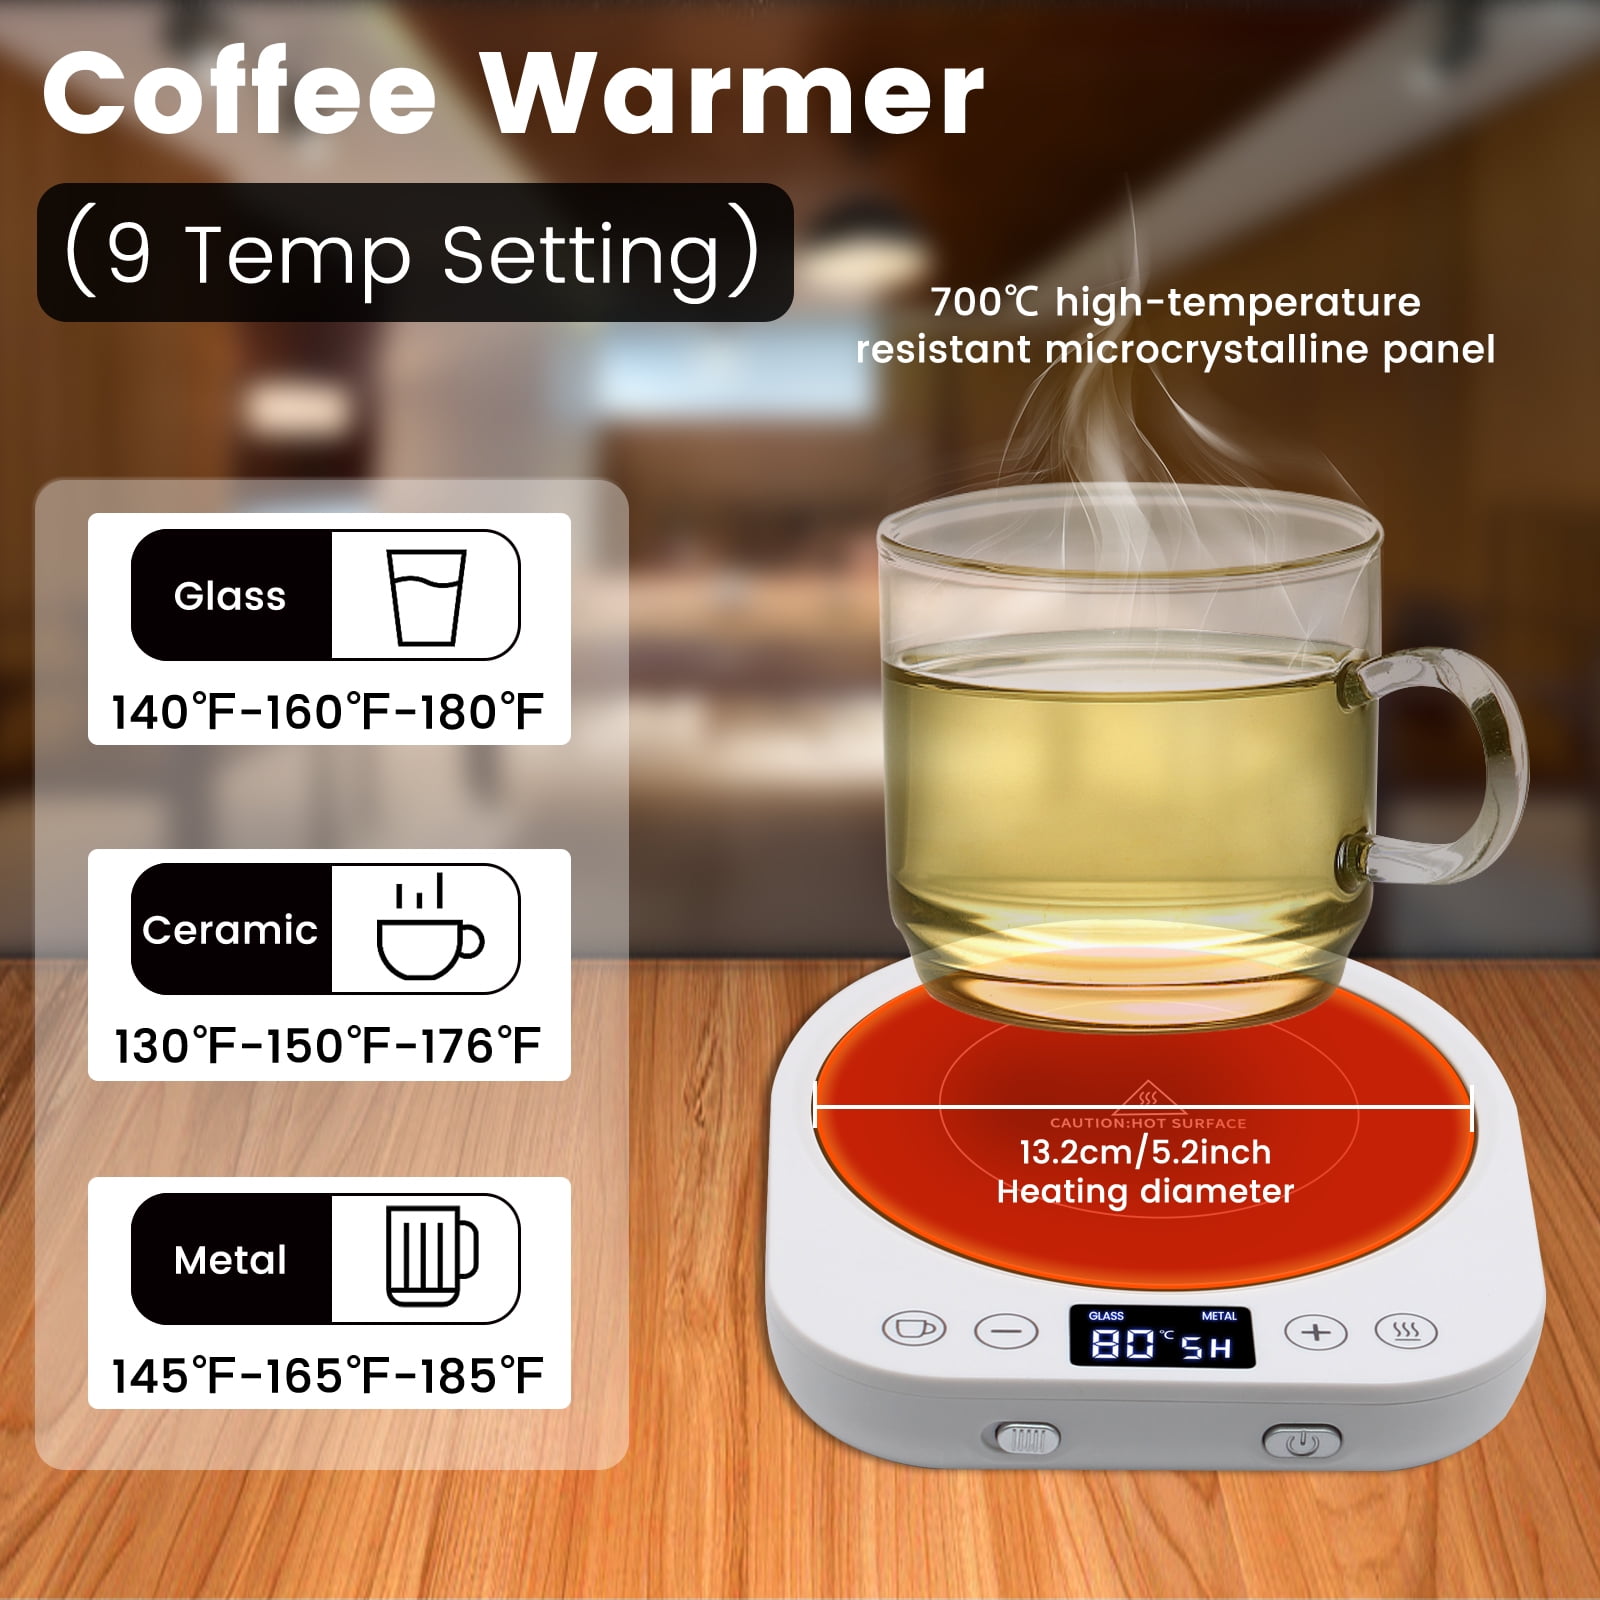 Coffee Mug Warmer,70W Coffee Warmer with 3 Charging Ports(2 Type C and 1  USB), Gravity/Auto Shut Off/Timing Function/3-Temps Settings(130~170°F)